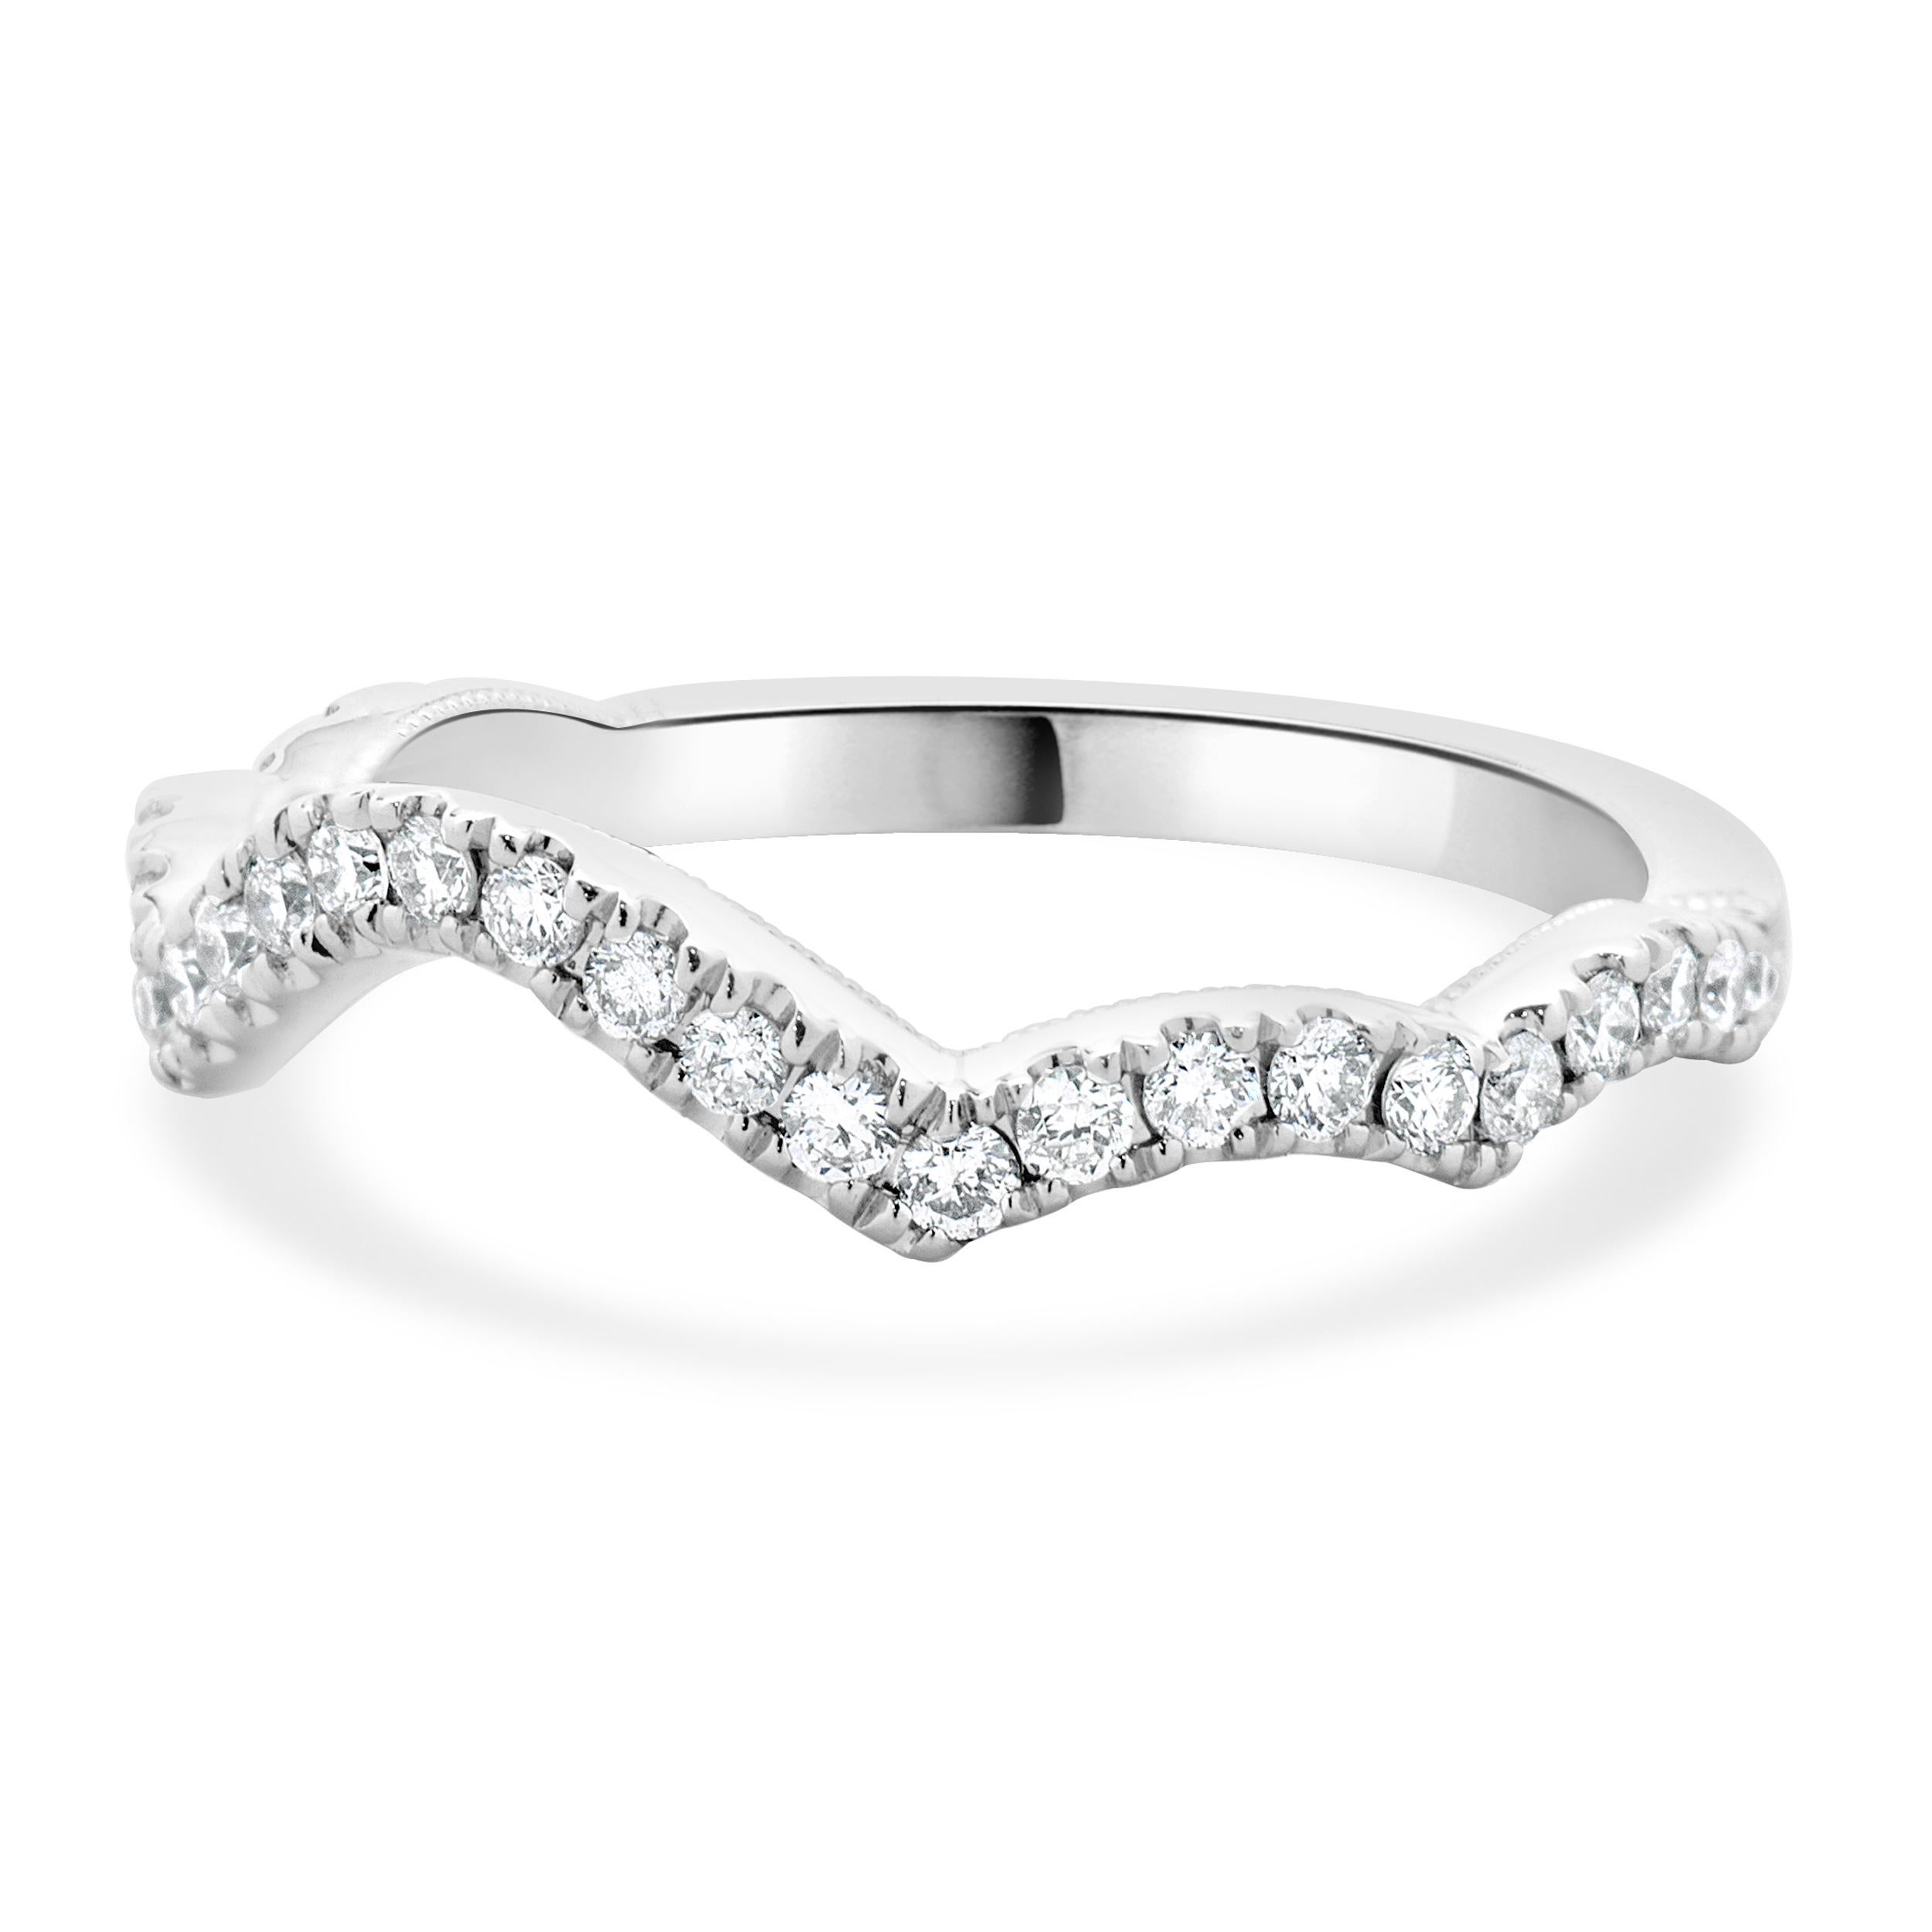 Designer: Custom
Material: 14K white gold
Diamonds: 29 round brilliant cut = 0.30cttw
Color: H
Clarity: SI2
Size: 6.75 sizing available 
Dimensions: ring measures 2.3mm in width
Weight: 2.29 grams
